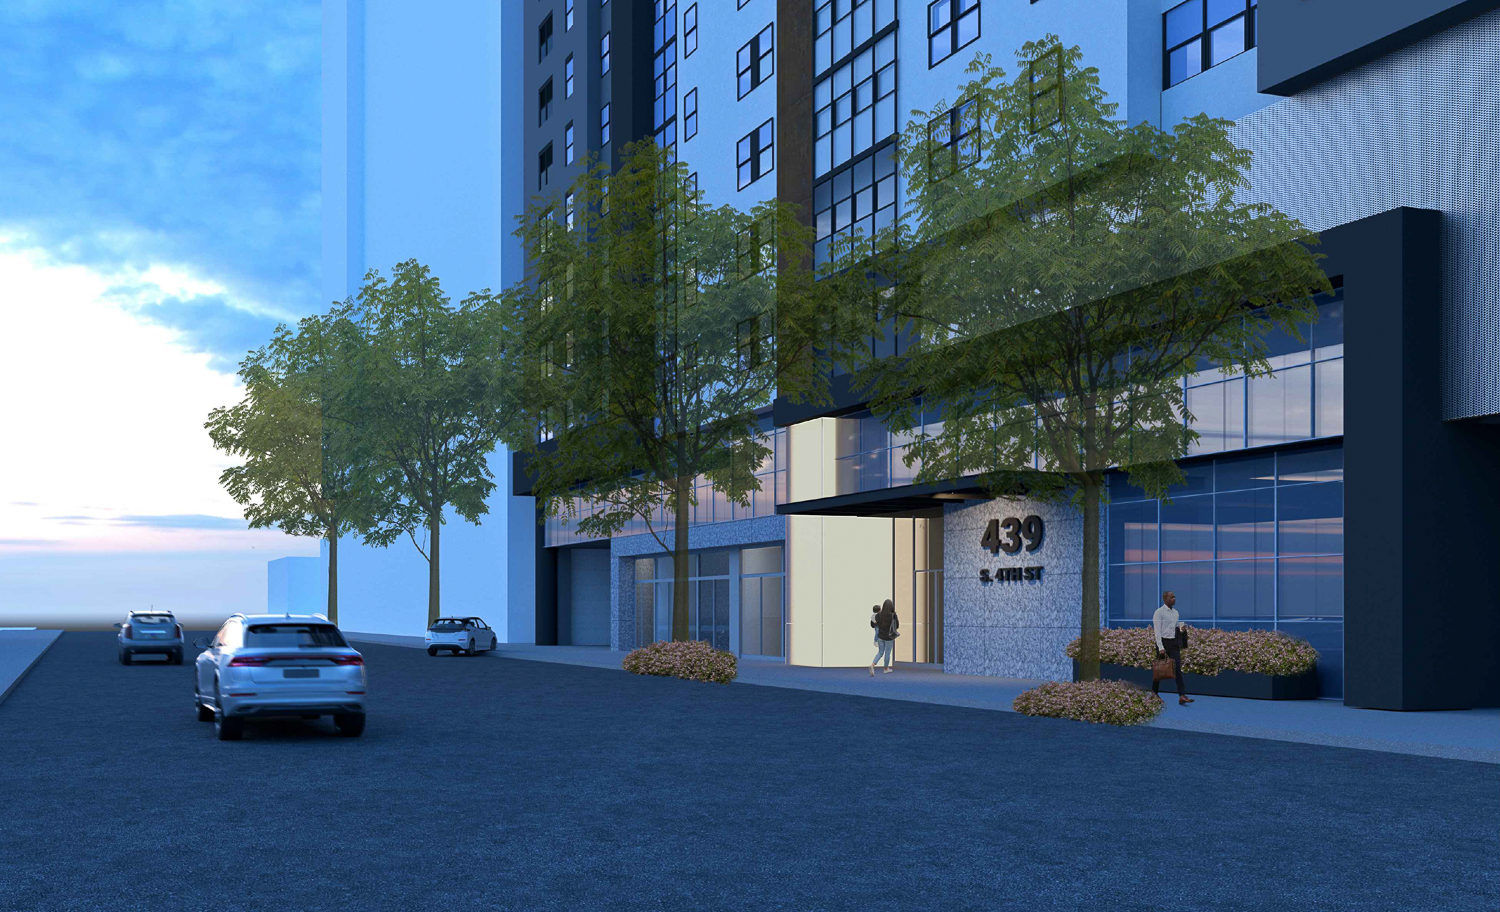 439 South 4th Street residential entrance view at night, rendering by SCDC